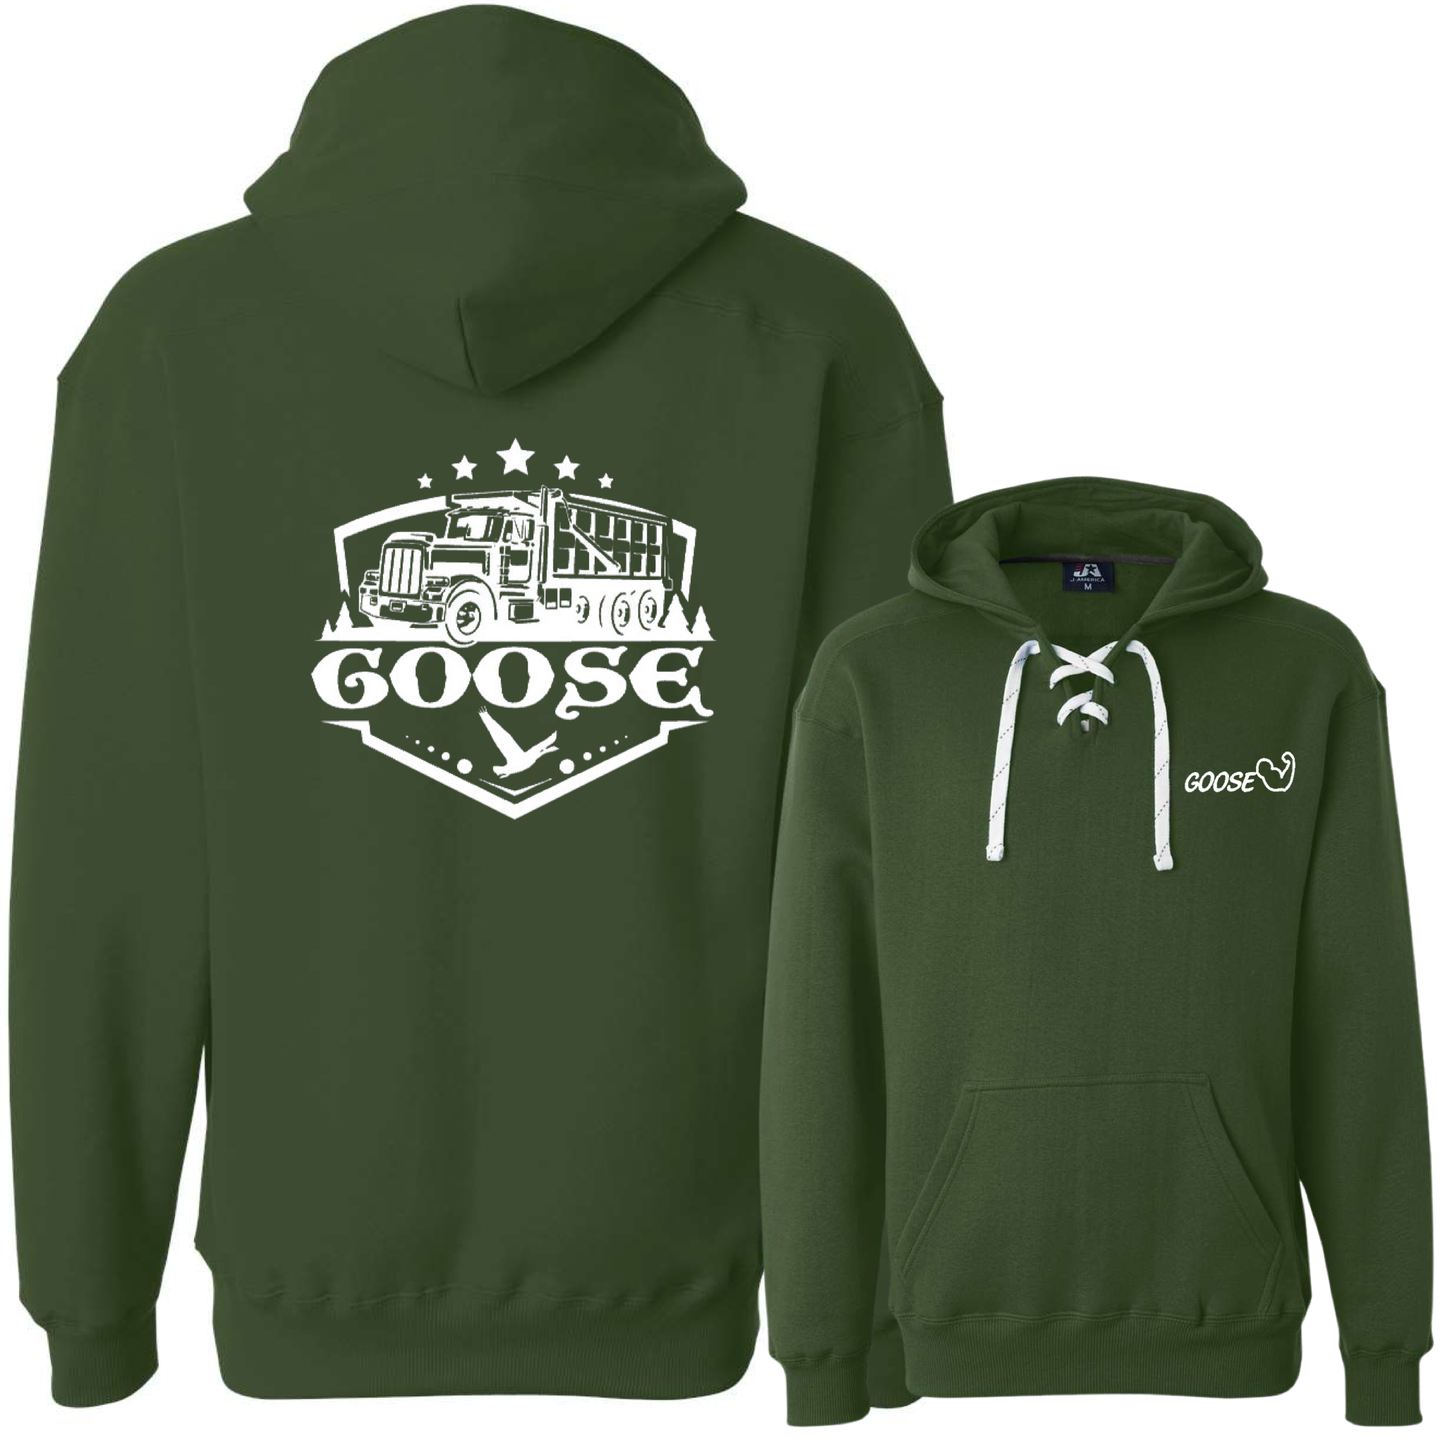 Goose Lace Up Hoodies